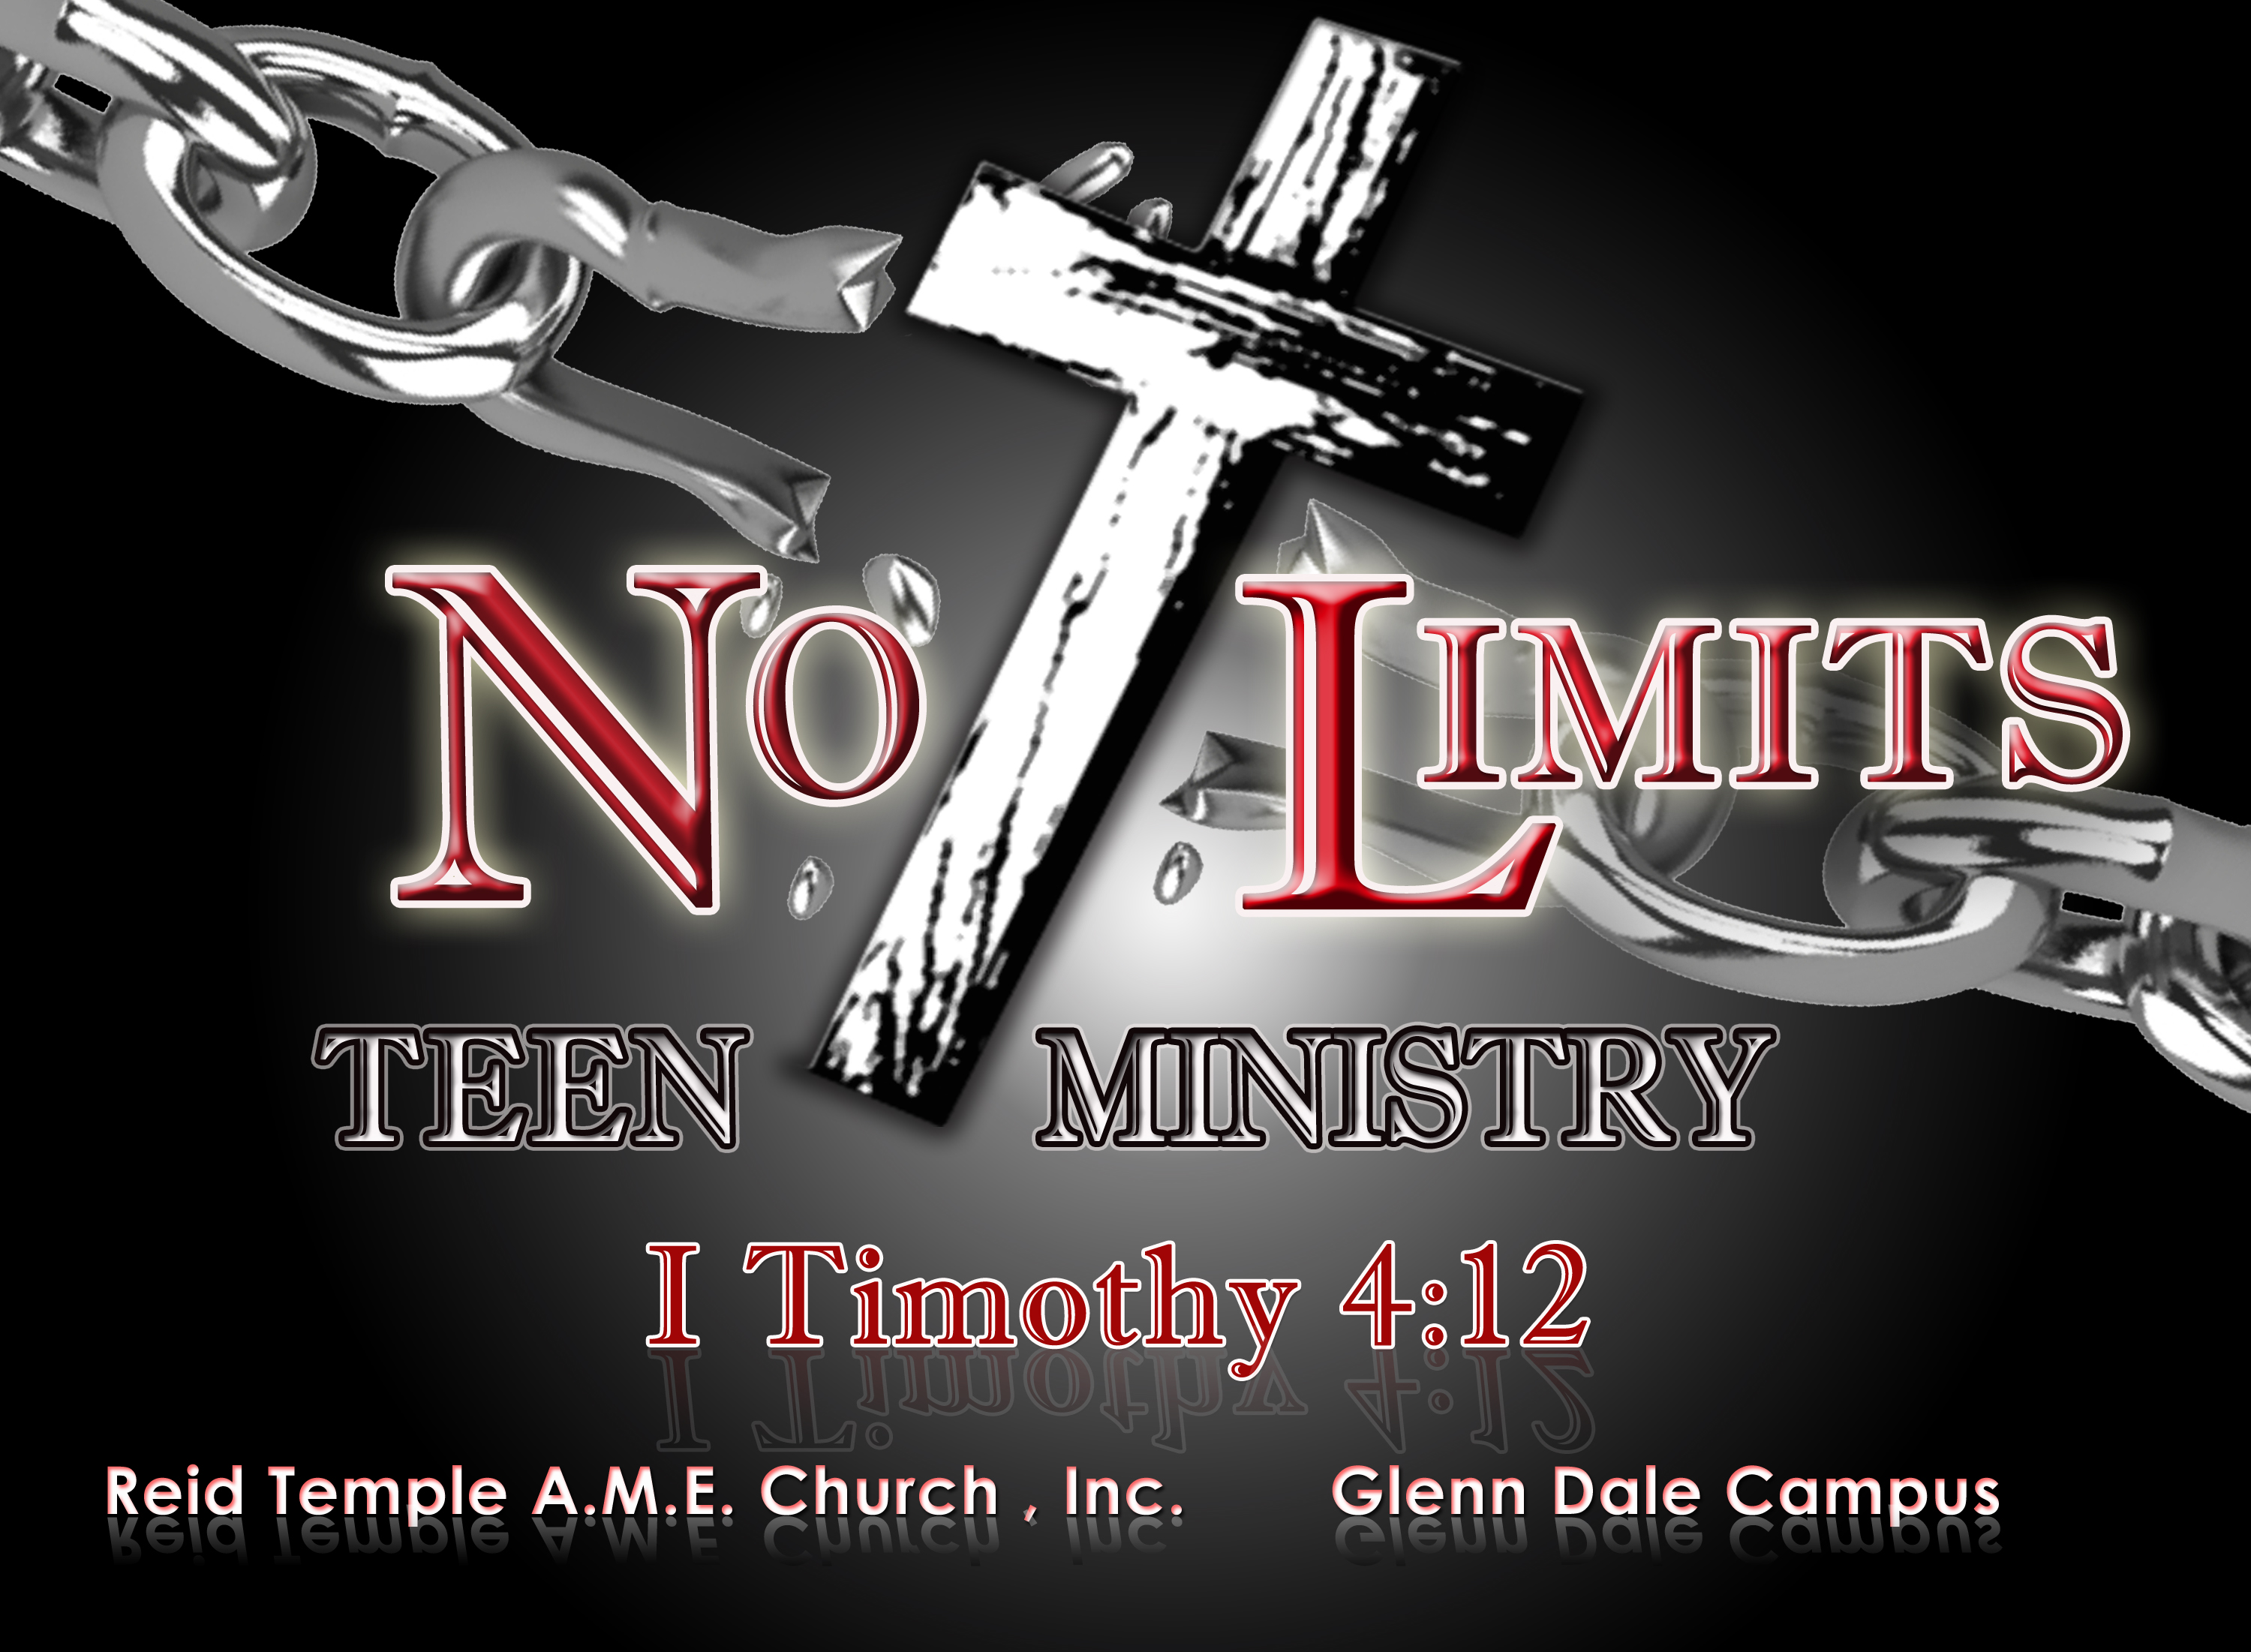 The vision of the Teen Ministry is to see a teen focused ministry that will save, engage, disciple, transform and deliver teens by the gospel of Jesus Christ. Seeing Teens effected by and contributing to Evangelism, Empowerment, Education, Economics, and Expansion! We seek to transform the lives of teens with all types of backgrounds, problems, and walks of life. The No Limits Teen Ministry exist to inject the power of God into the lives of Teens in the church and our community to produce transformation. The No Limits Teen Ministry seeks to foster a real relationship for teens with Jesus; expose them to their purpose and destiny; unite them with other Christ like-minded teens; and create a burning desire to serve and give back.  HOW TO PARTICIPATE/VOLUNTEER Contact Rev. Demetrius Price at dprice@reidtemple.org